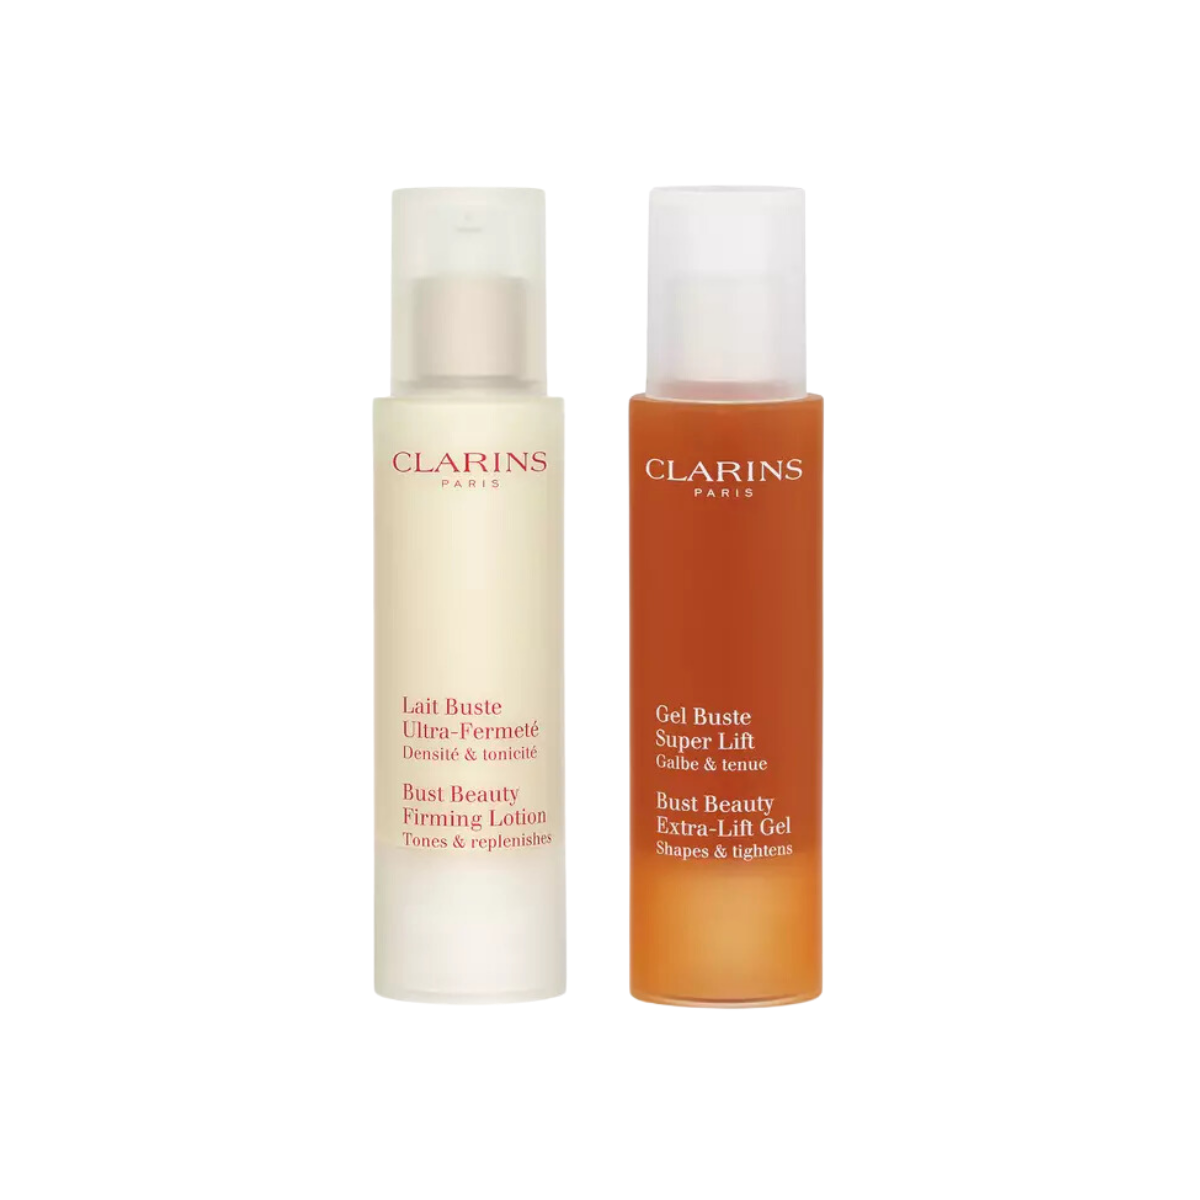 Clarins Bust Beauty Experts (Gel + Lotion Set, 50ml + 50ml)